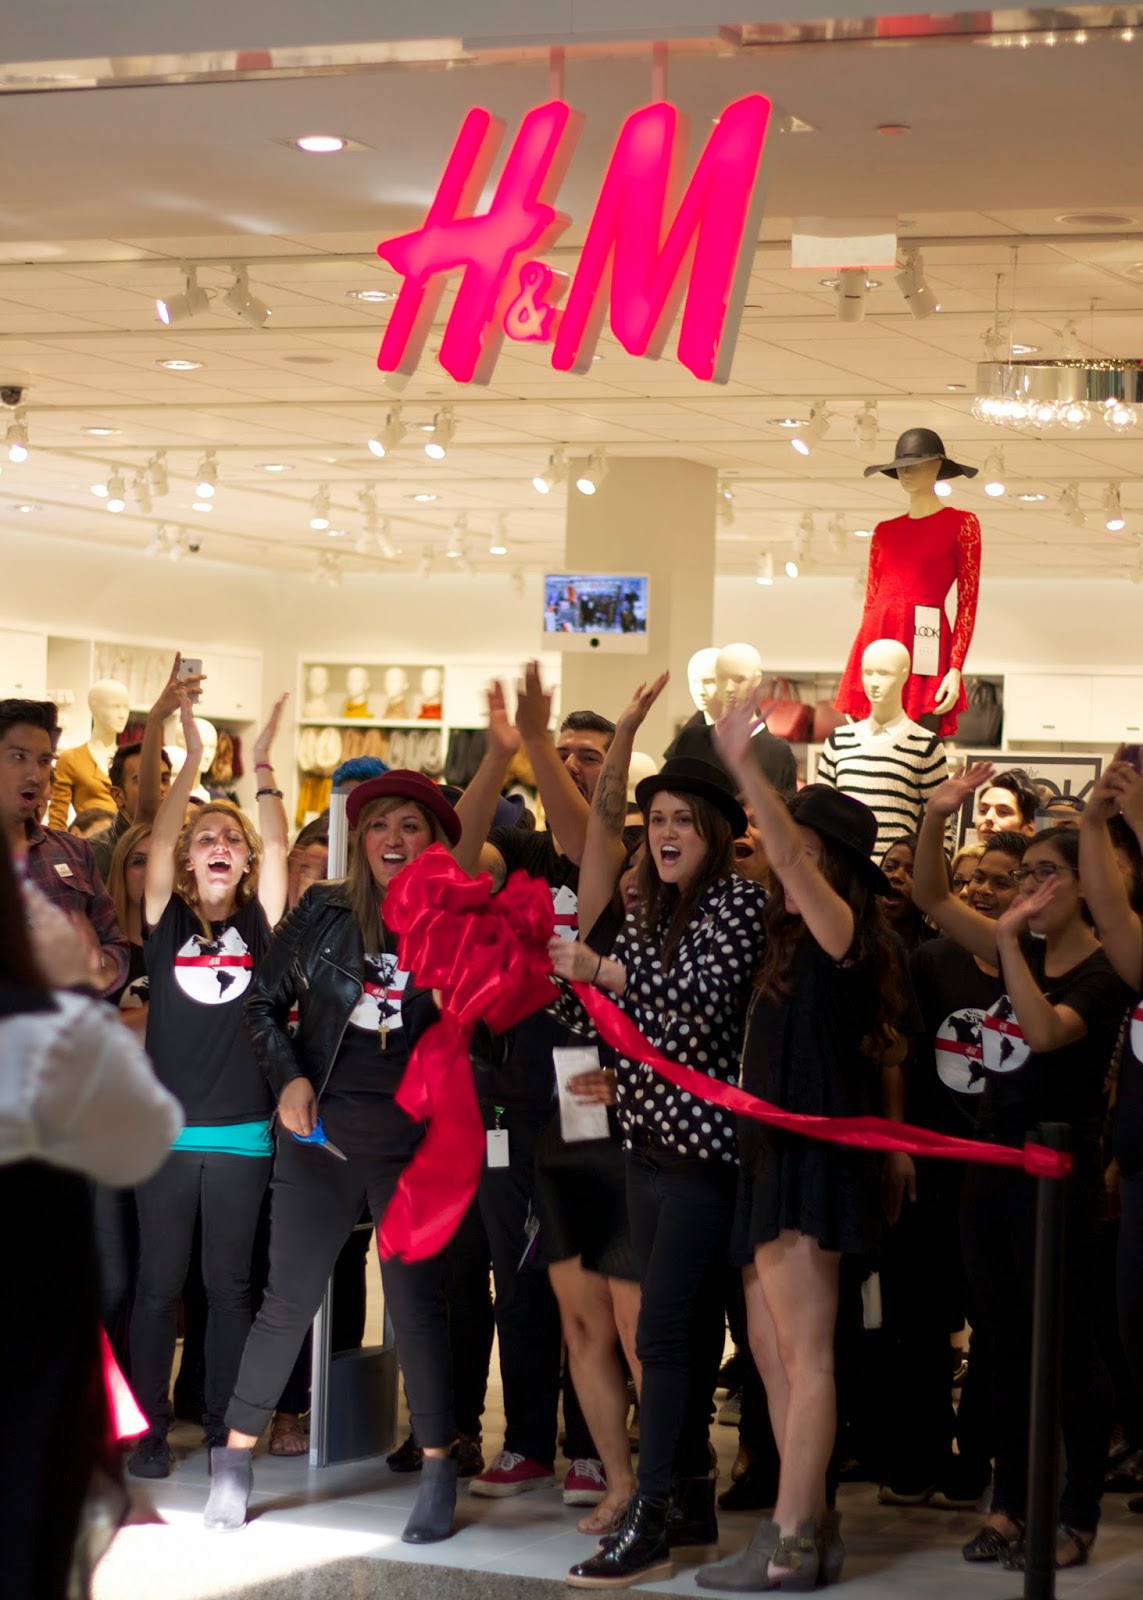 Join me at Grand Opening of H&M Outlets at the Border!